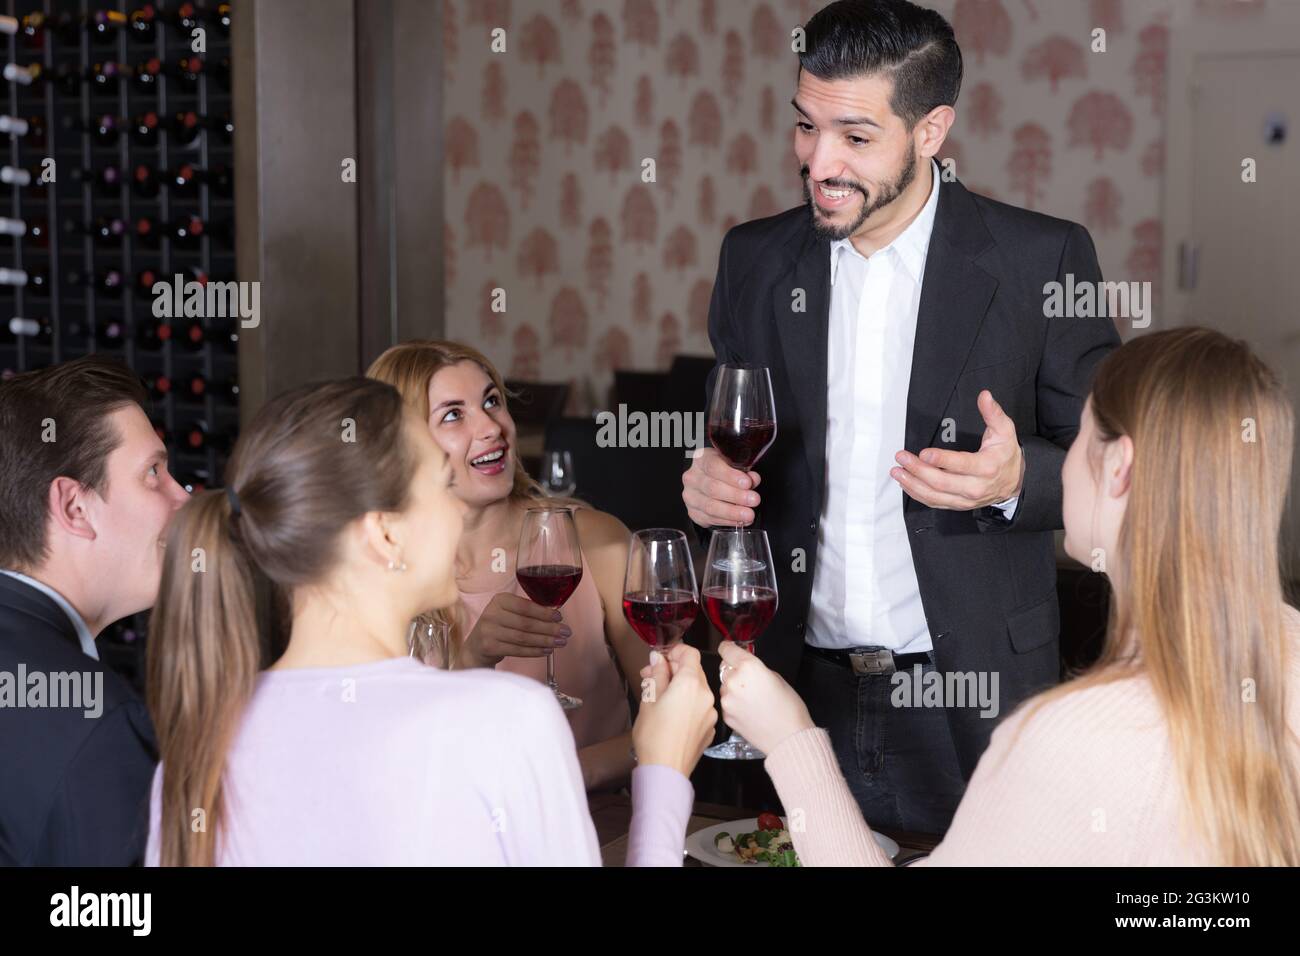 Handsome man pronouncing toast in restaurant Stock Photo